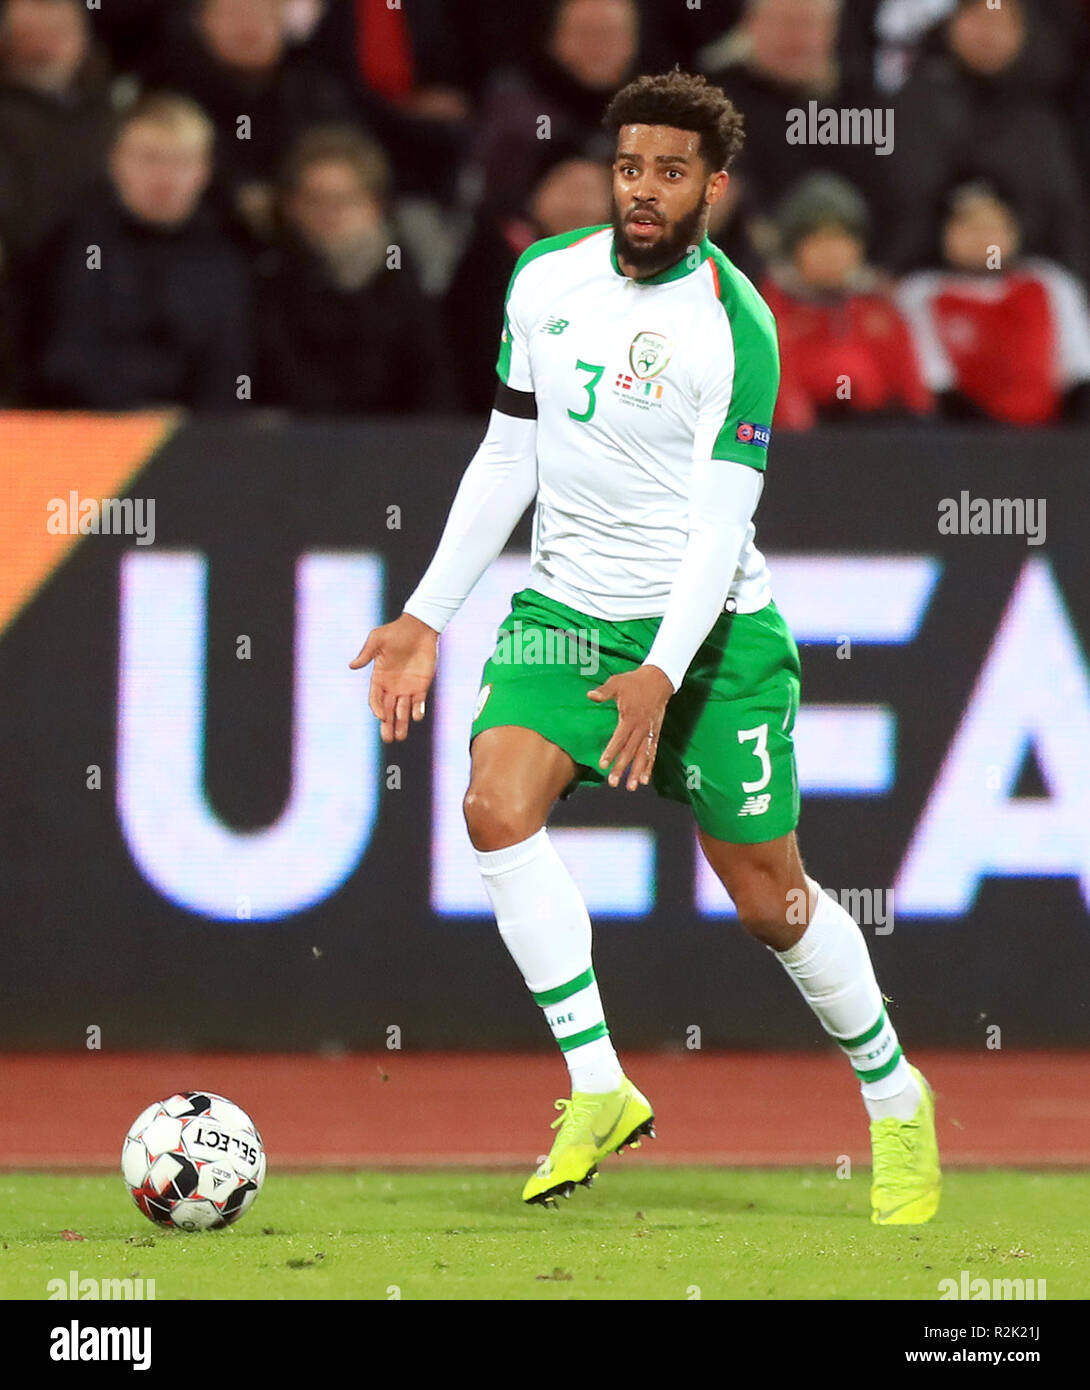 Republic of Ireland's Cyrus Christie during the UEFA Nations League, Group B4 match at Ceres Park, Aarhus. PRESS ASSOCIATION Photo. Picture date: Monday November 19, 2018. See PA story SOCCER Denmark. Photo credit should read: Simon Cooper/PA Wire. Stock Photo